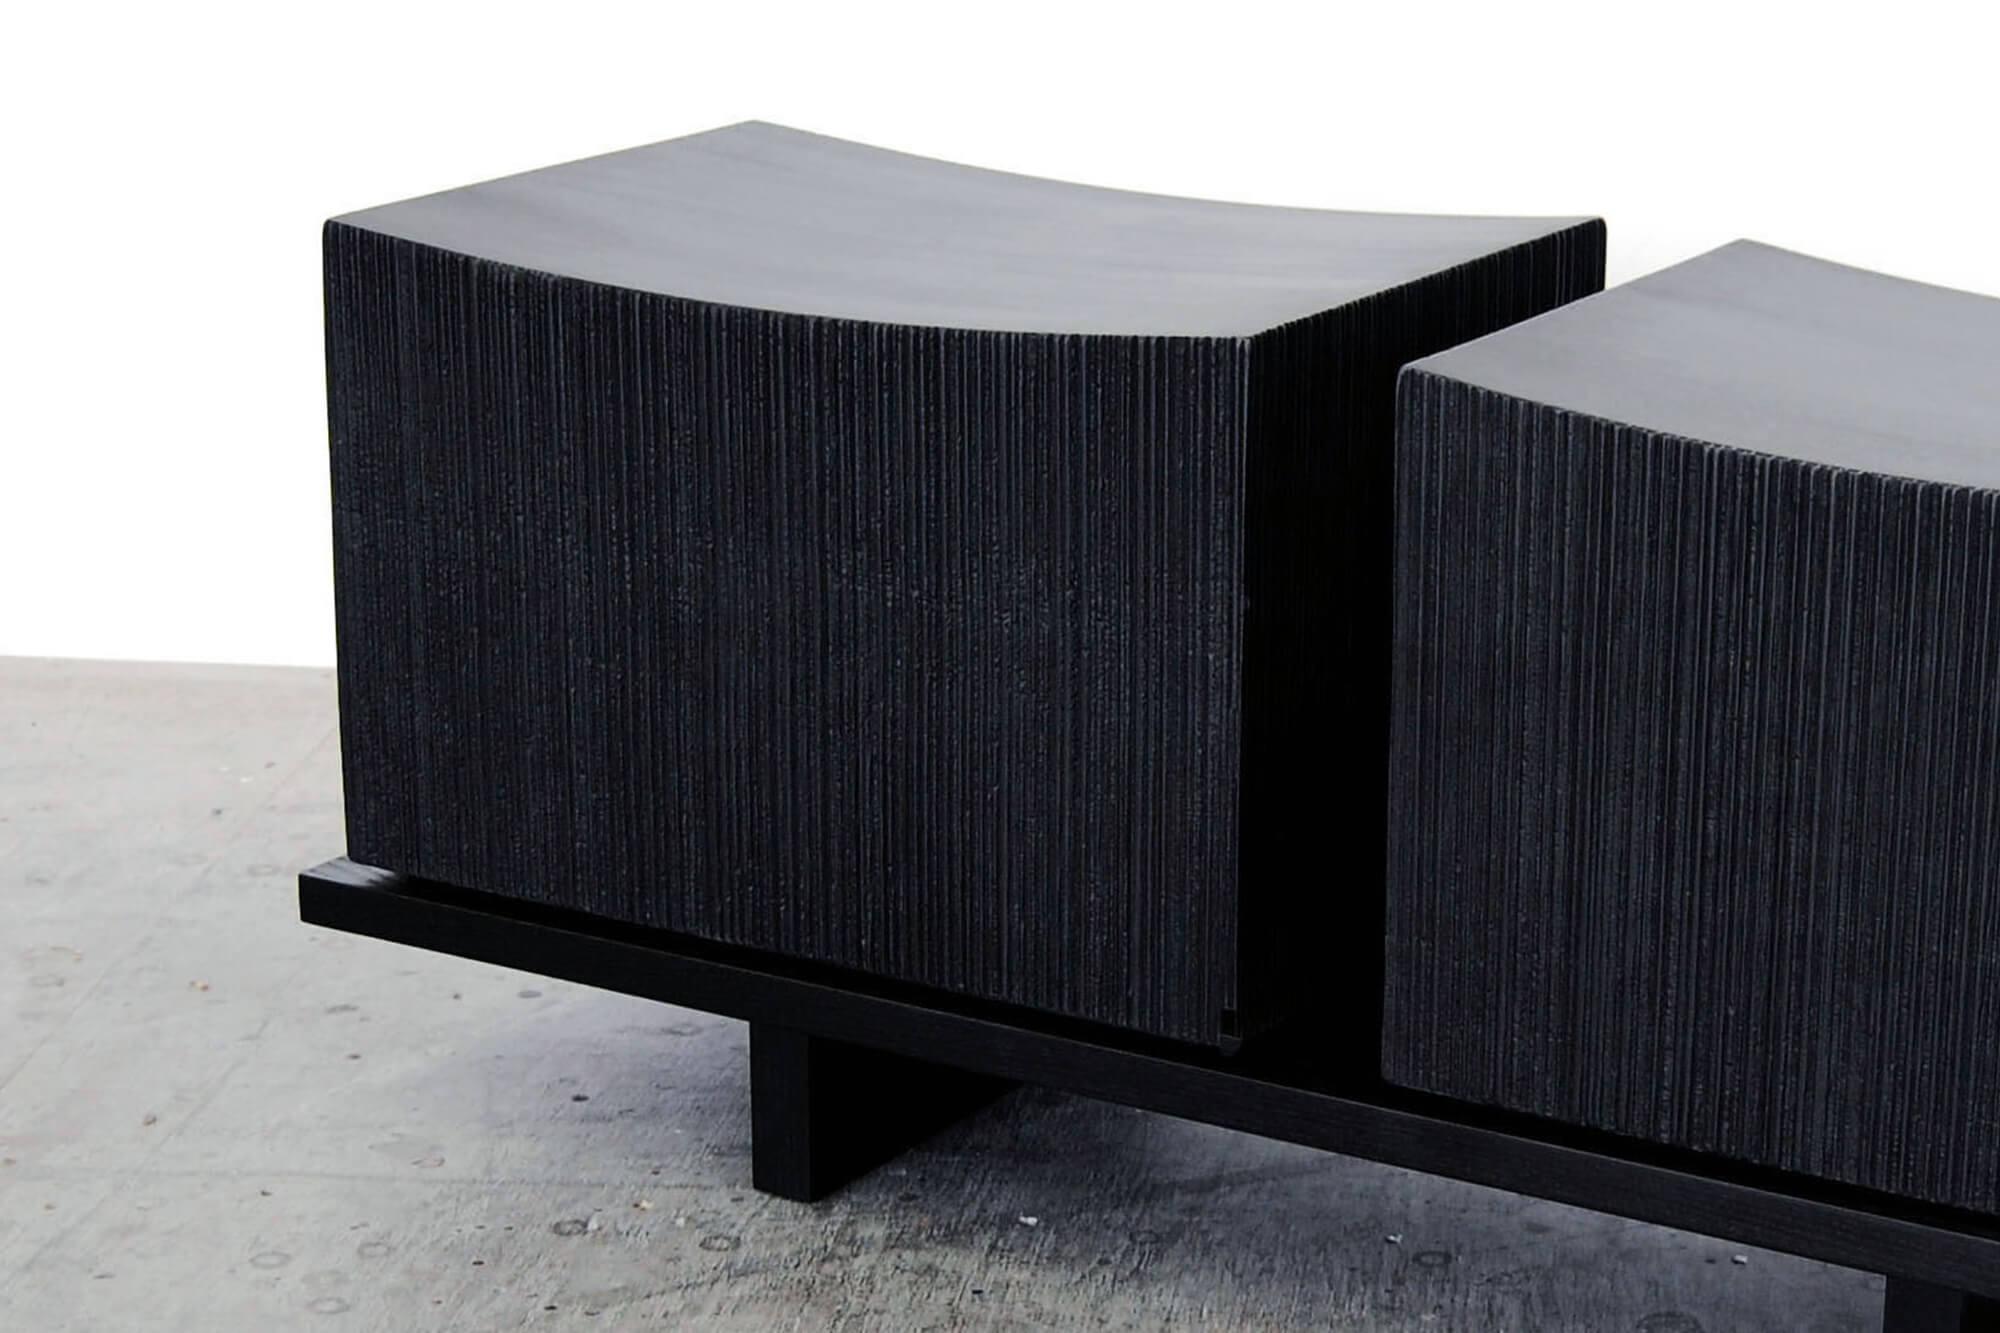 This elevated bench from John Eric Byers merges bold, modern geometries with traditional craft. The wood is hand-sawn and lacquered with a distinctive textured pattern to give a sophisticated finish to a simplified silhouette. 

John Eric Byers is